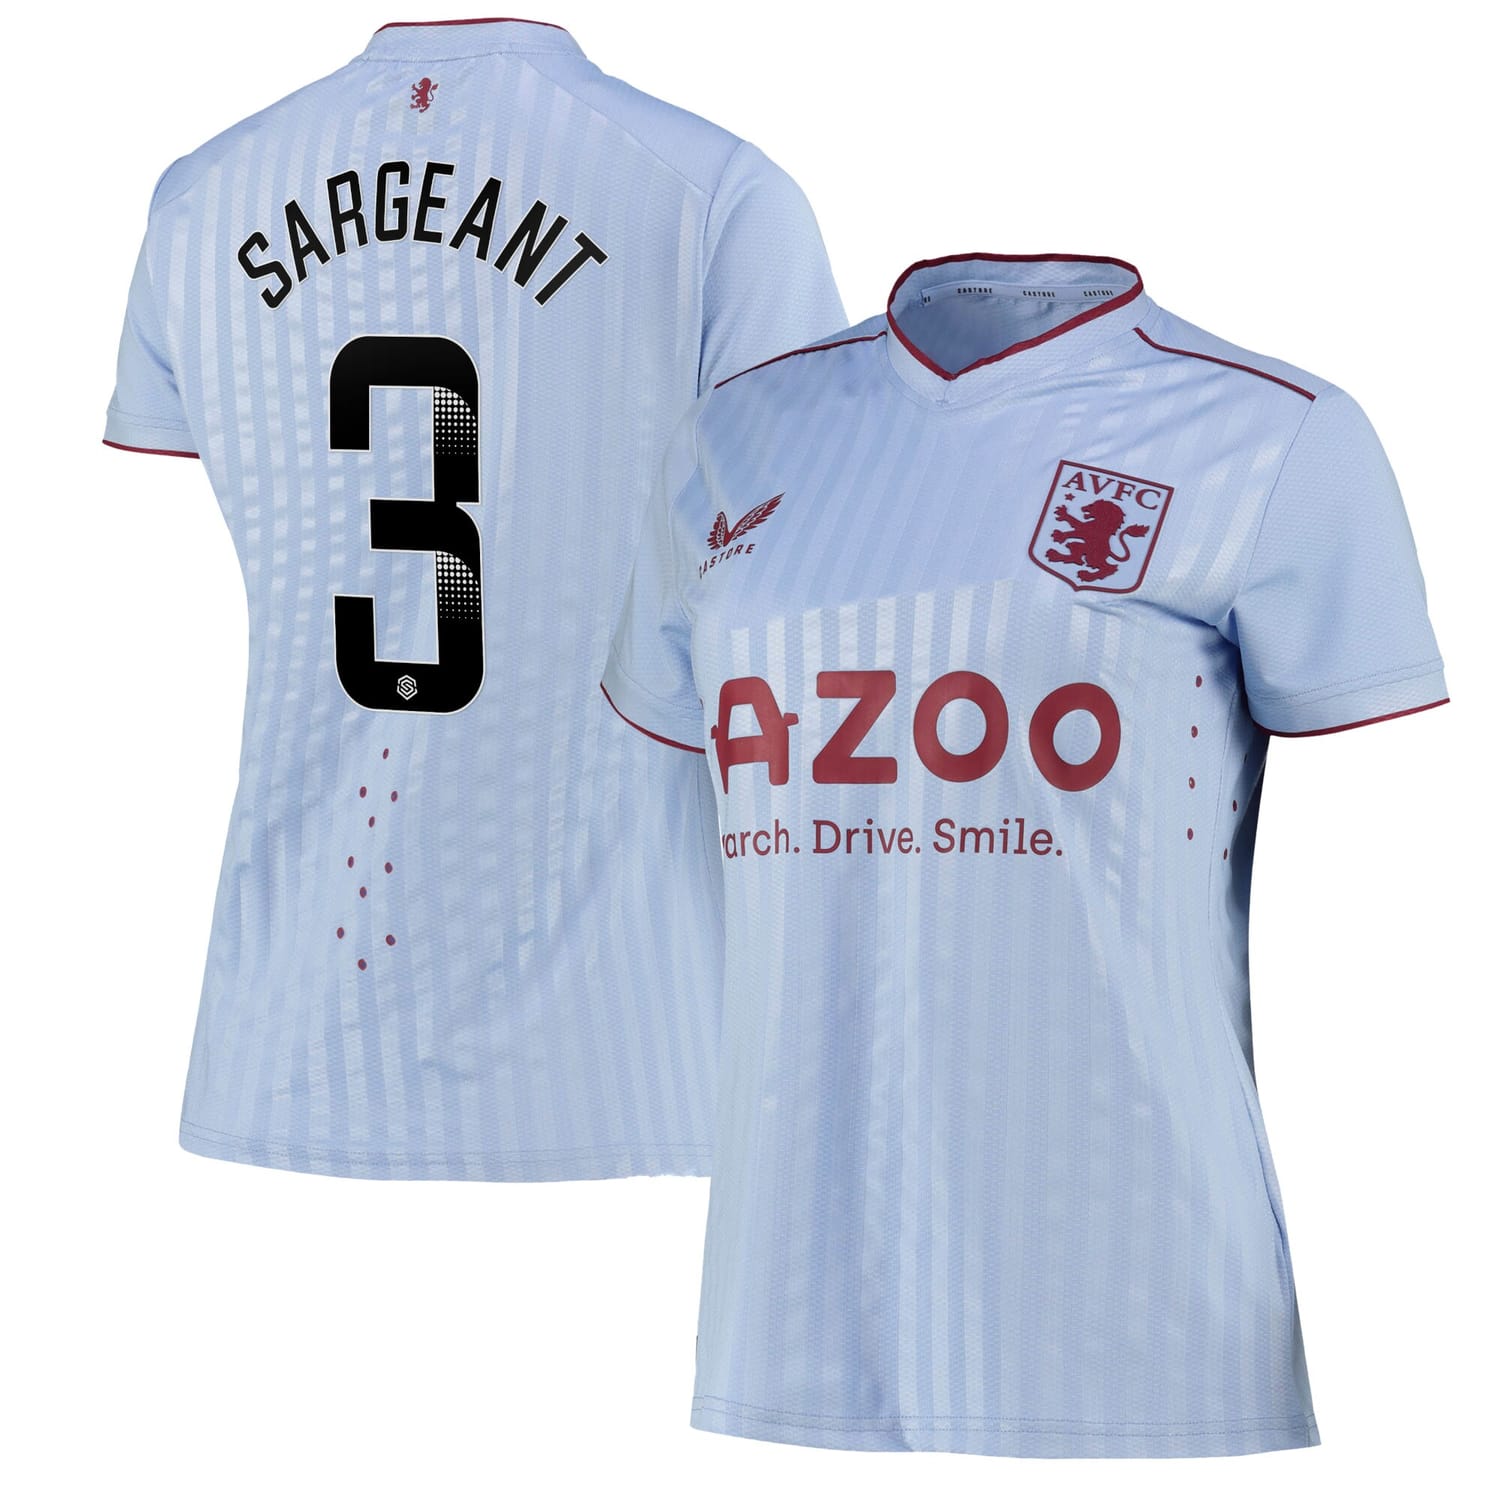 Premier League Aston Villa Away WSL Pro Jersey Shirt 2022-23 player Meaghan Sargeant 3 printing for Women